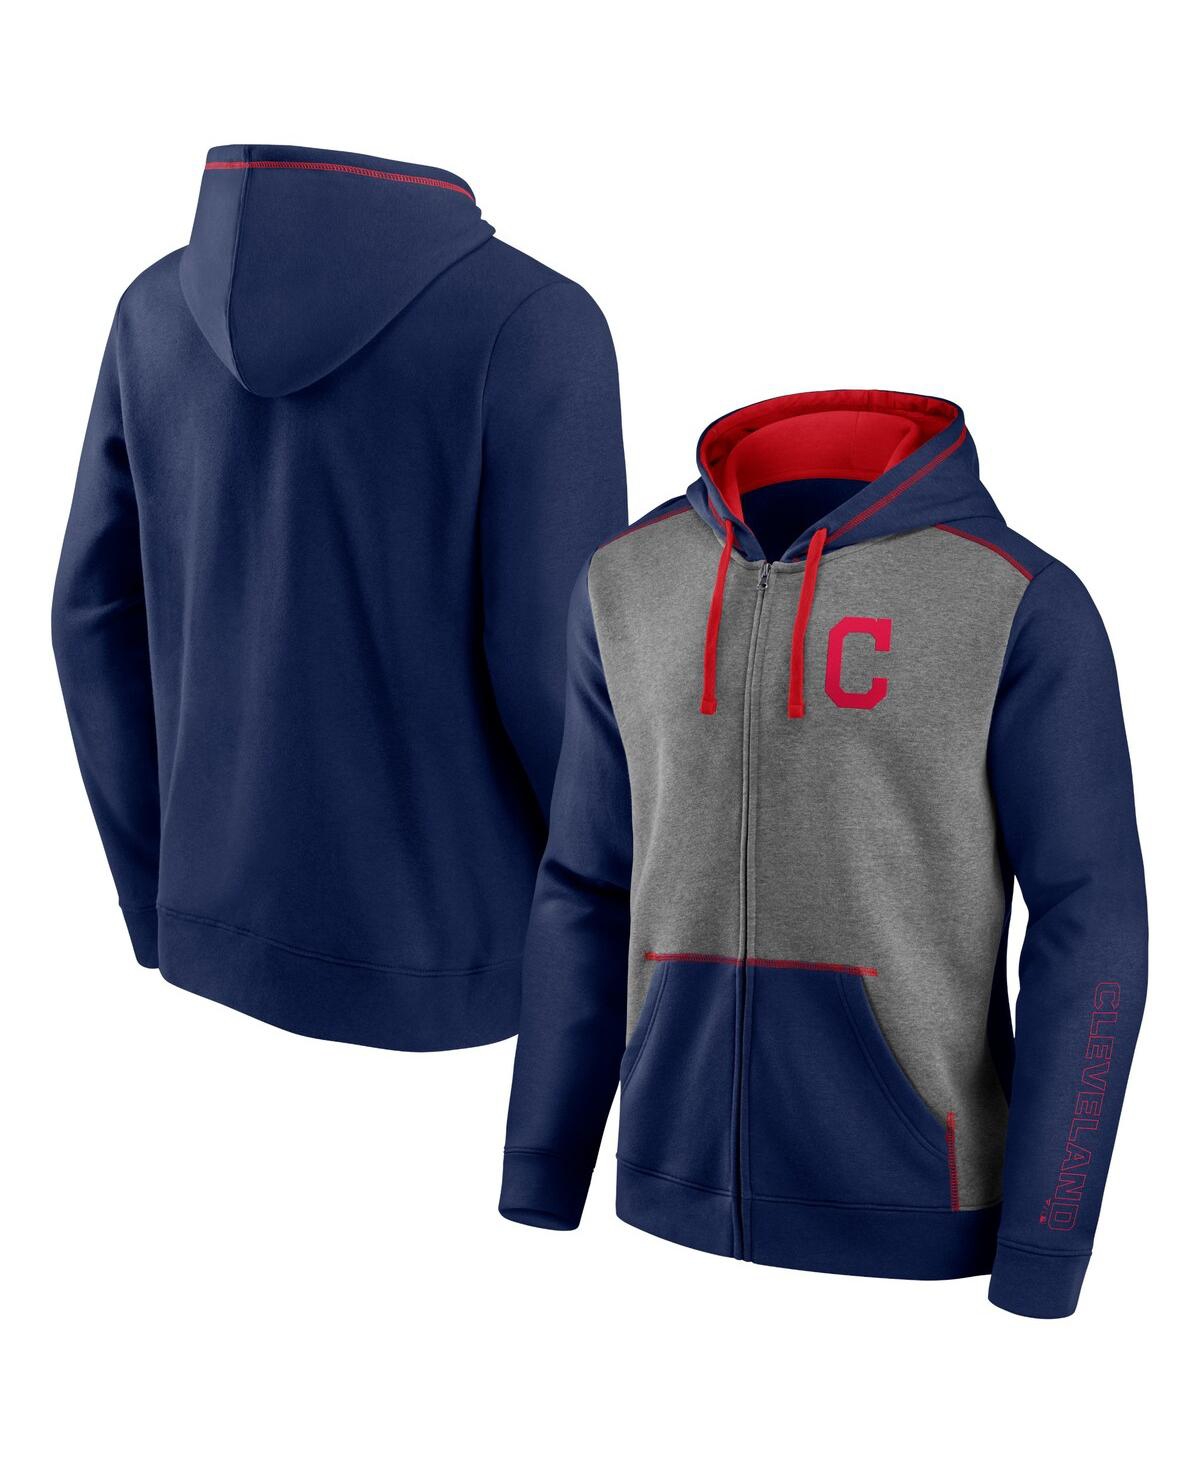 Fanatics Men's Navy, Heathered Gray Cleveland Indians Expansion Team Full-zip Hoodie In Navy,heathered Gray